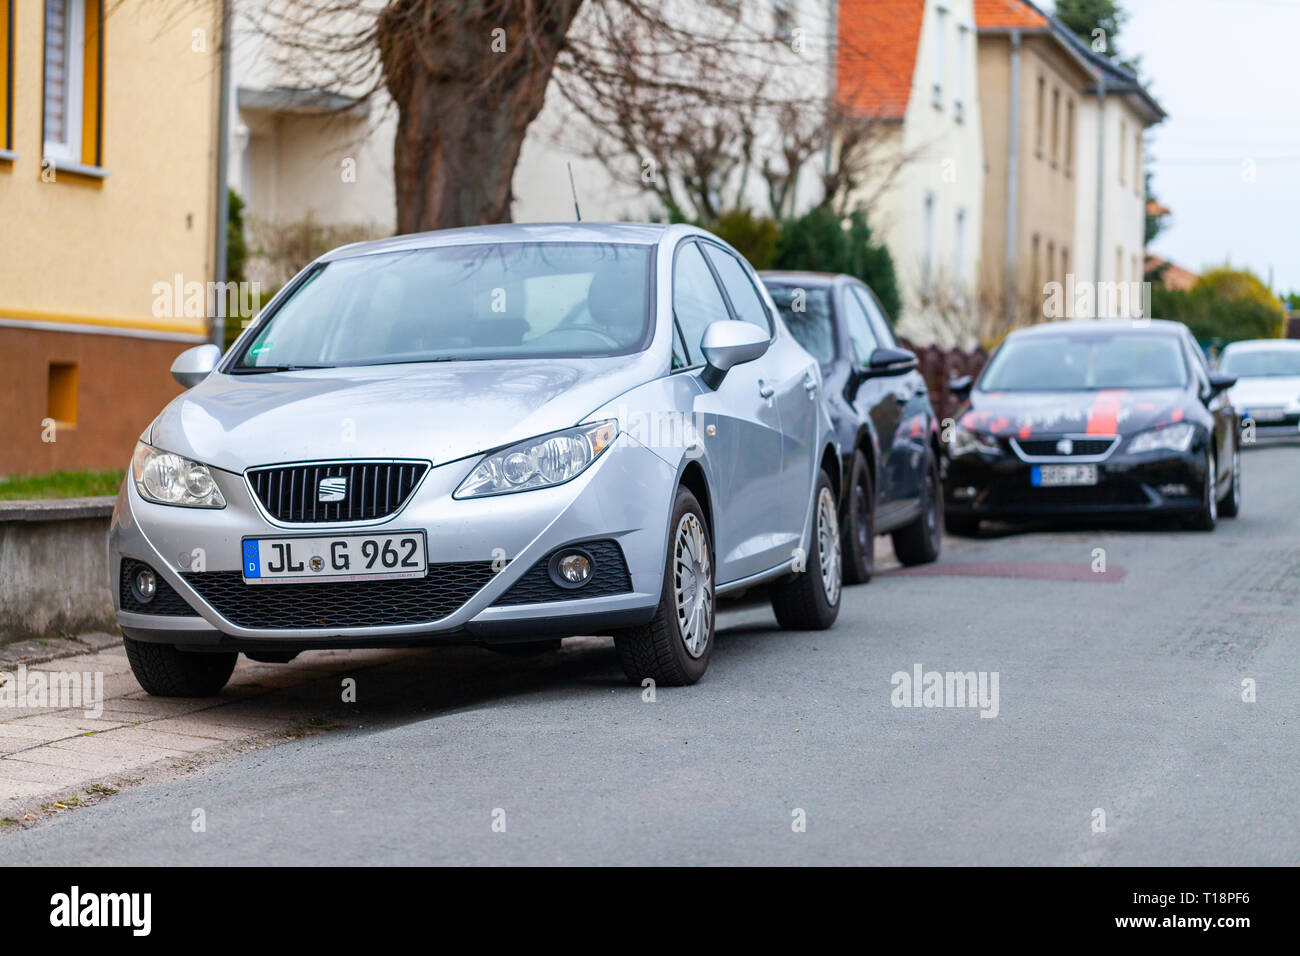 BURG / GERMANY - MARCH 3, 2019: Seat Ibiza stands on a street in Burg. Seat is a Spanish automobile manufacturer with its head office in Martorell, Sp Stock Photo